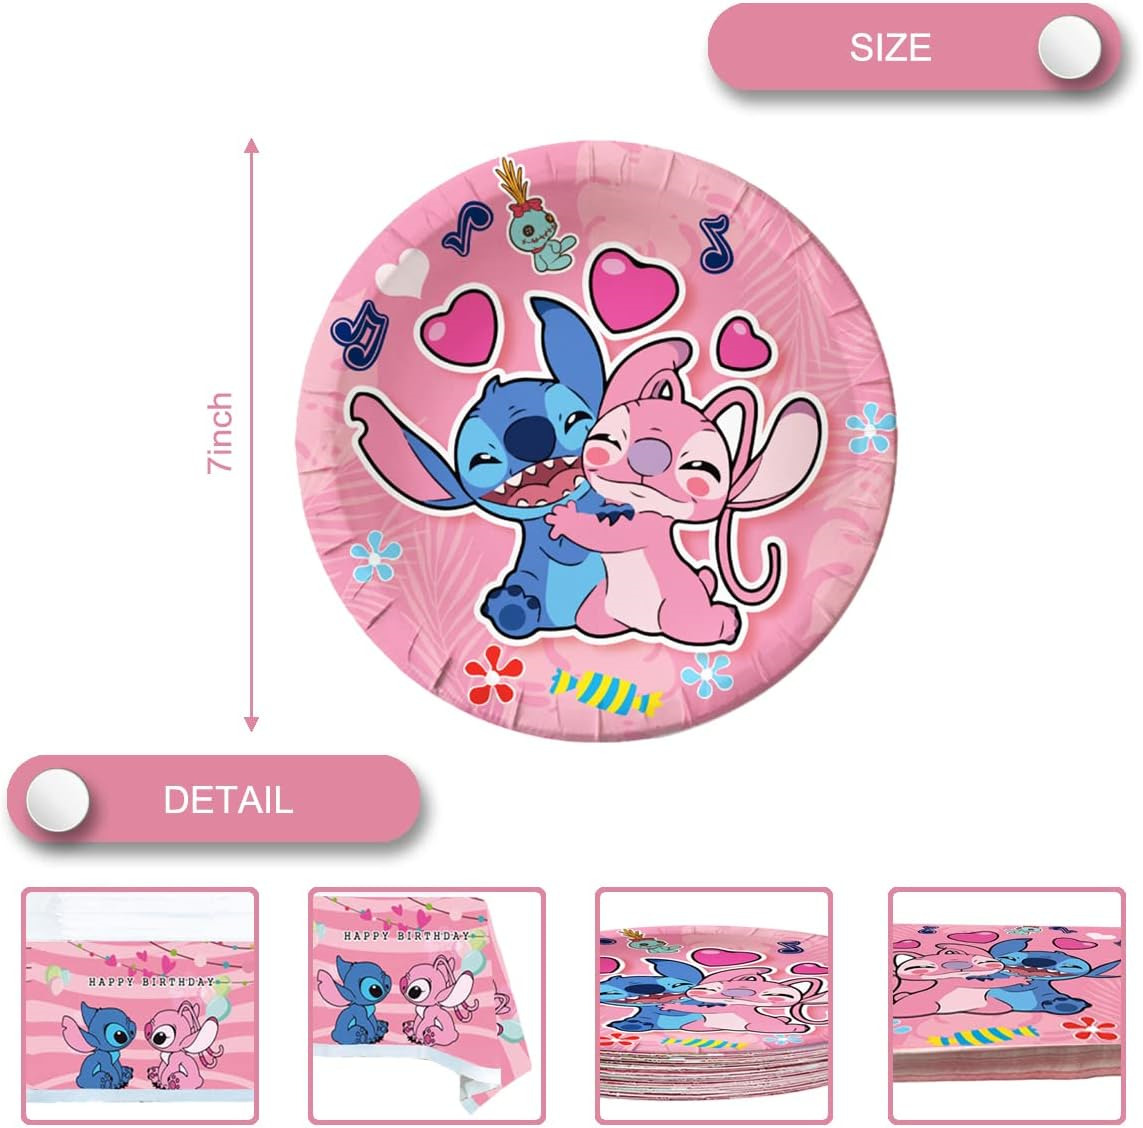 Party Super Pink Lilo and Stitch Birthday Party Supplies Includes 1Tablecloth 20 Napkins 20 Plates Lilo and Stitch Themed Party Decorations